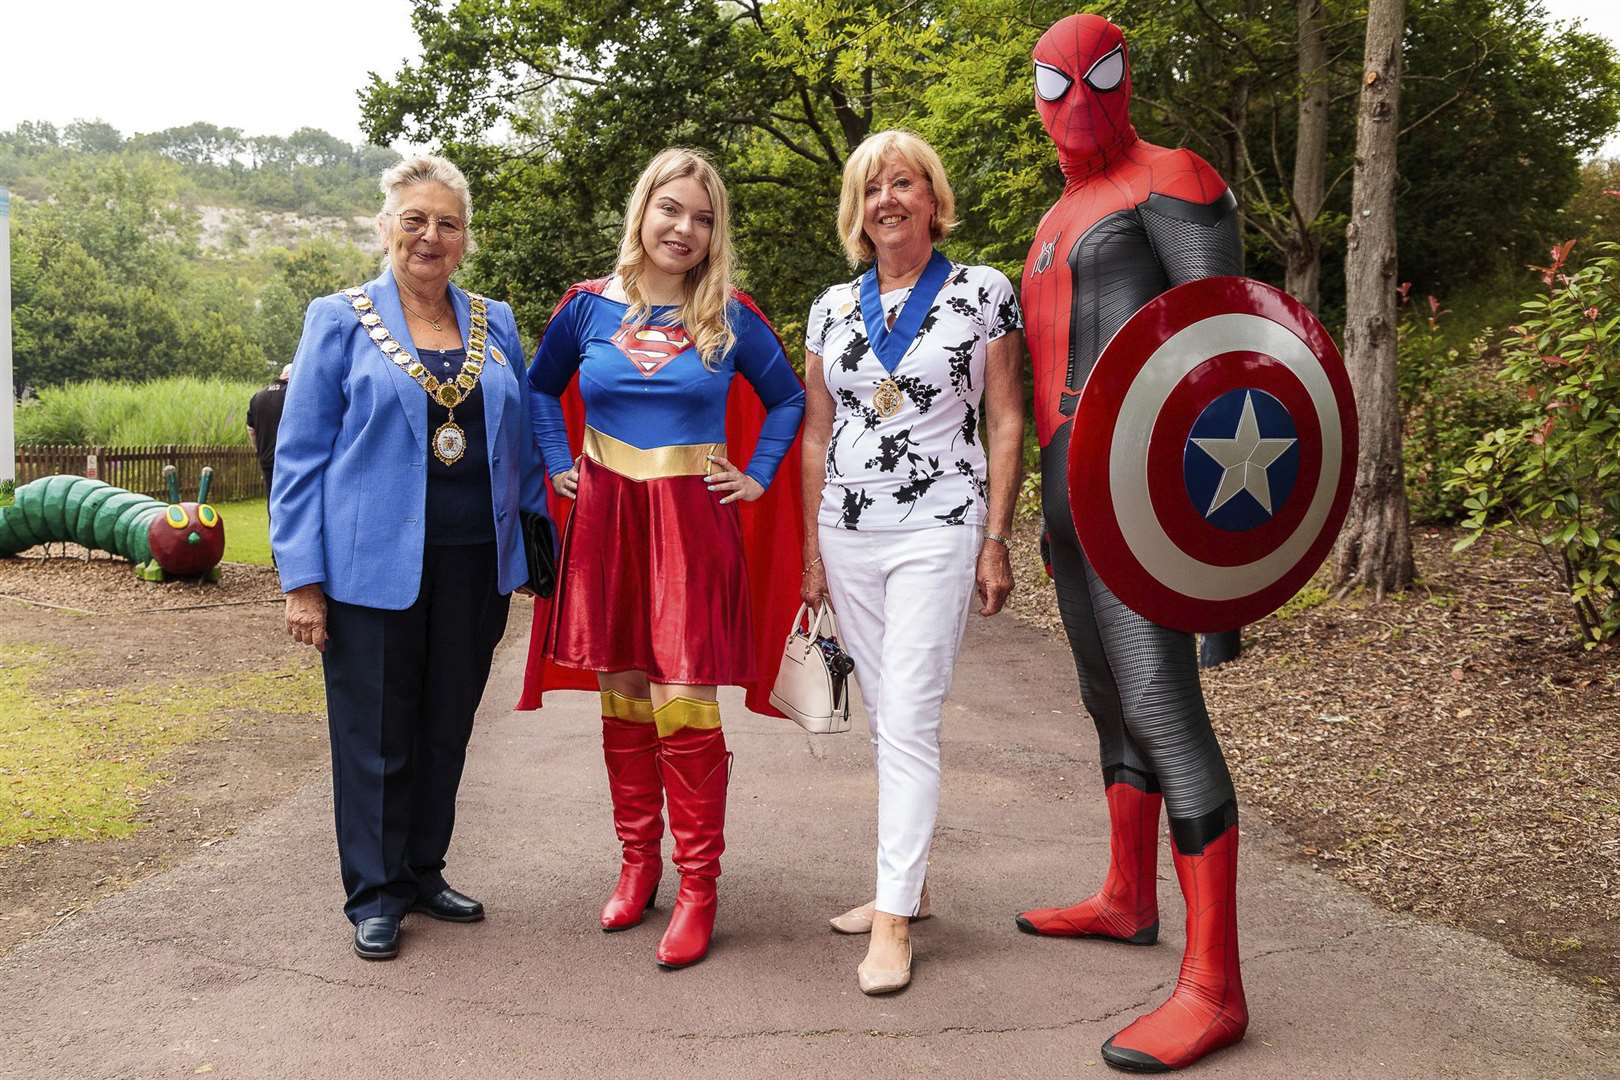 The Mayor of Dartford, Cllr Rosanna Currans, far left, and her envoy second from right, with Superwoman and Spiderman